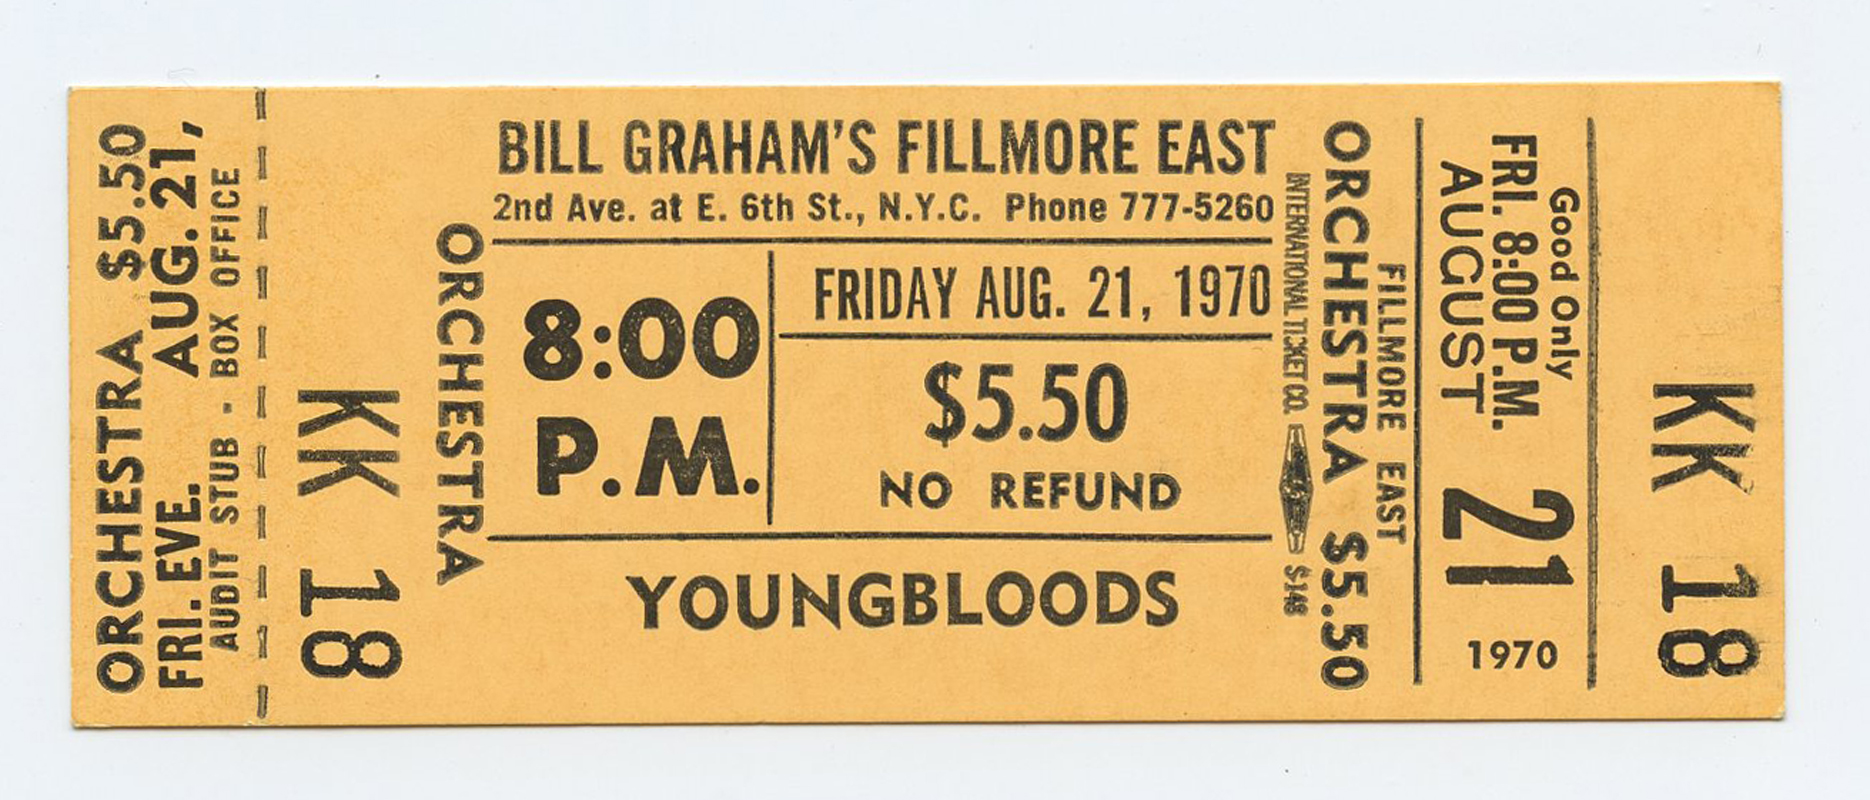 Bill Graham Fillmore East Vintage Ticket 1970 Aug 21 The Youngbloods